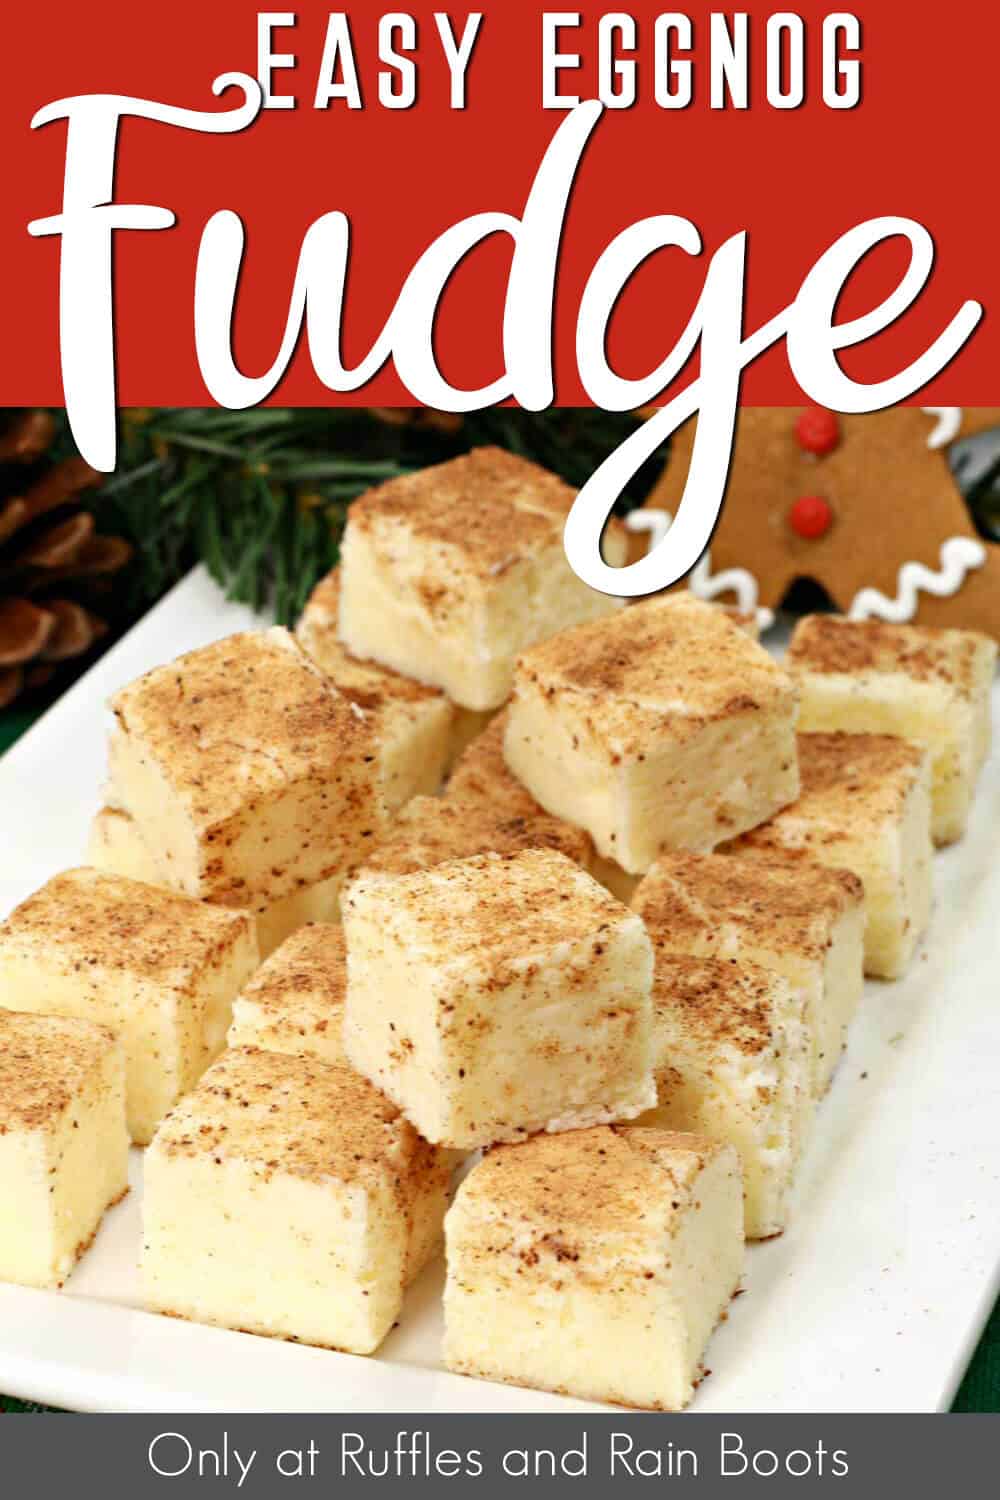 plate full of white chocolate fudge with text which reads easy eggnog fudge